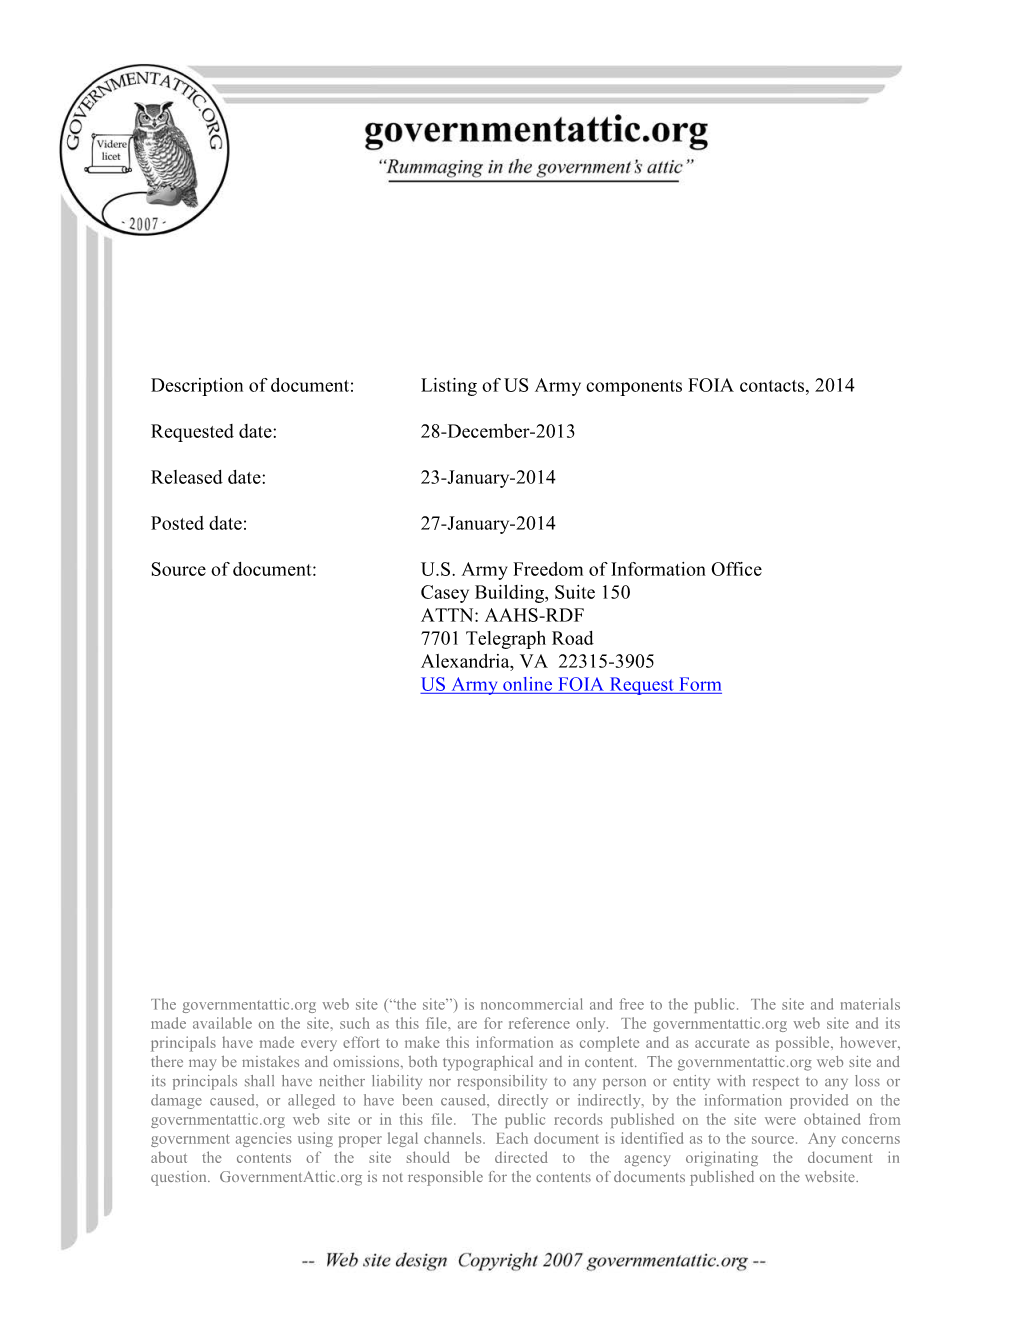 Listing of US Army Components FOIA Contacts, 2014